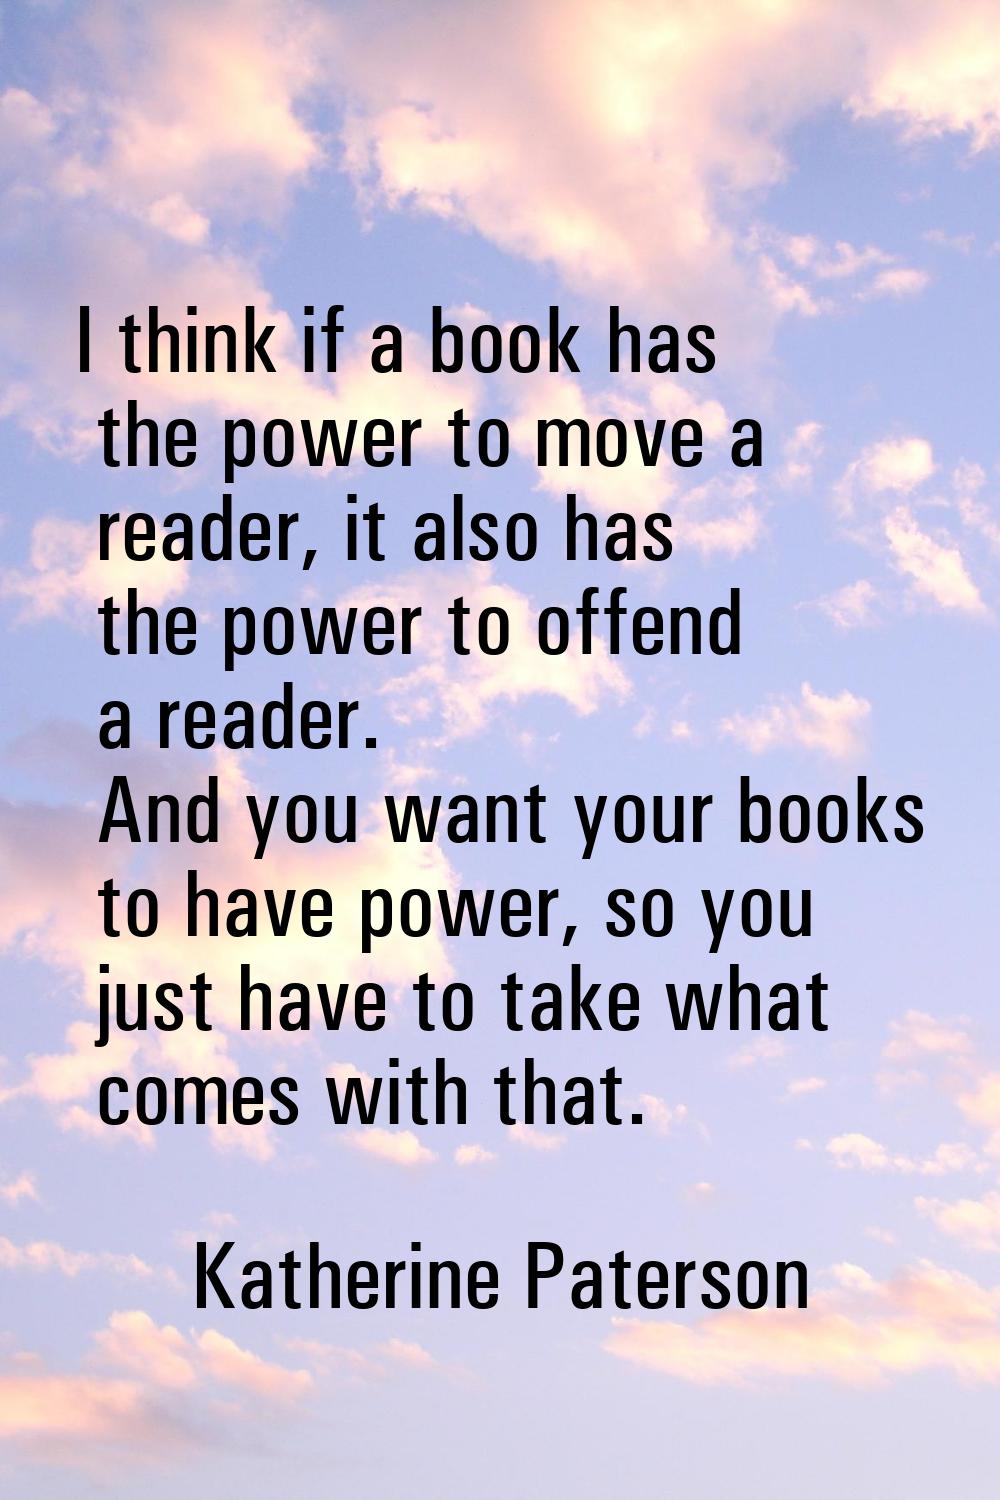 I think if a book has the power to move a reader, it also has the power to offend a reader. And you